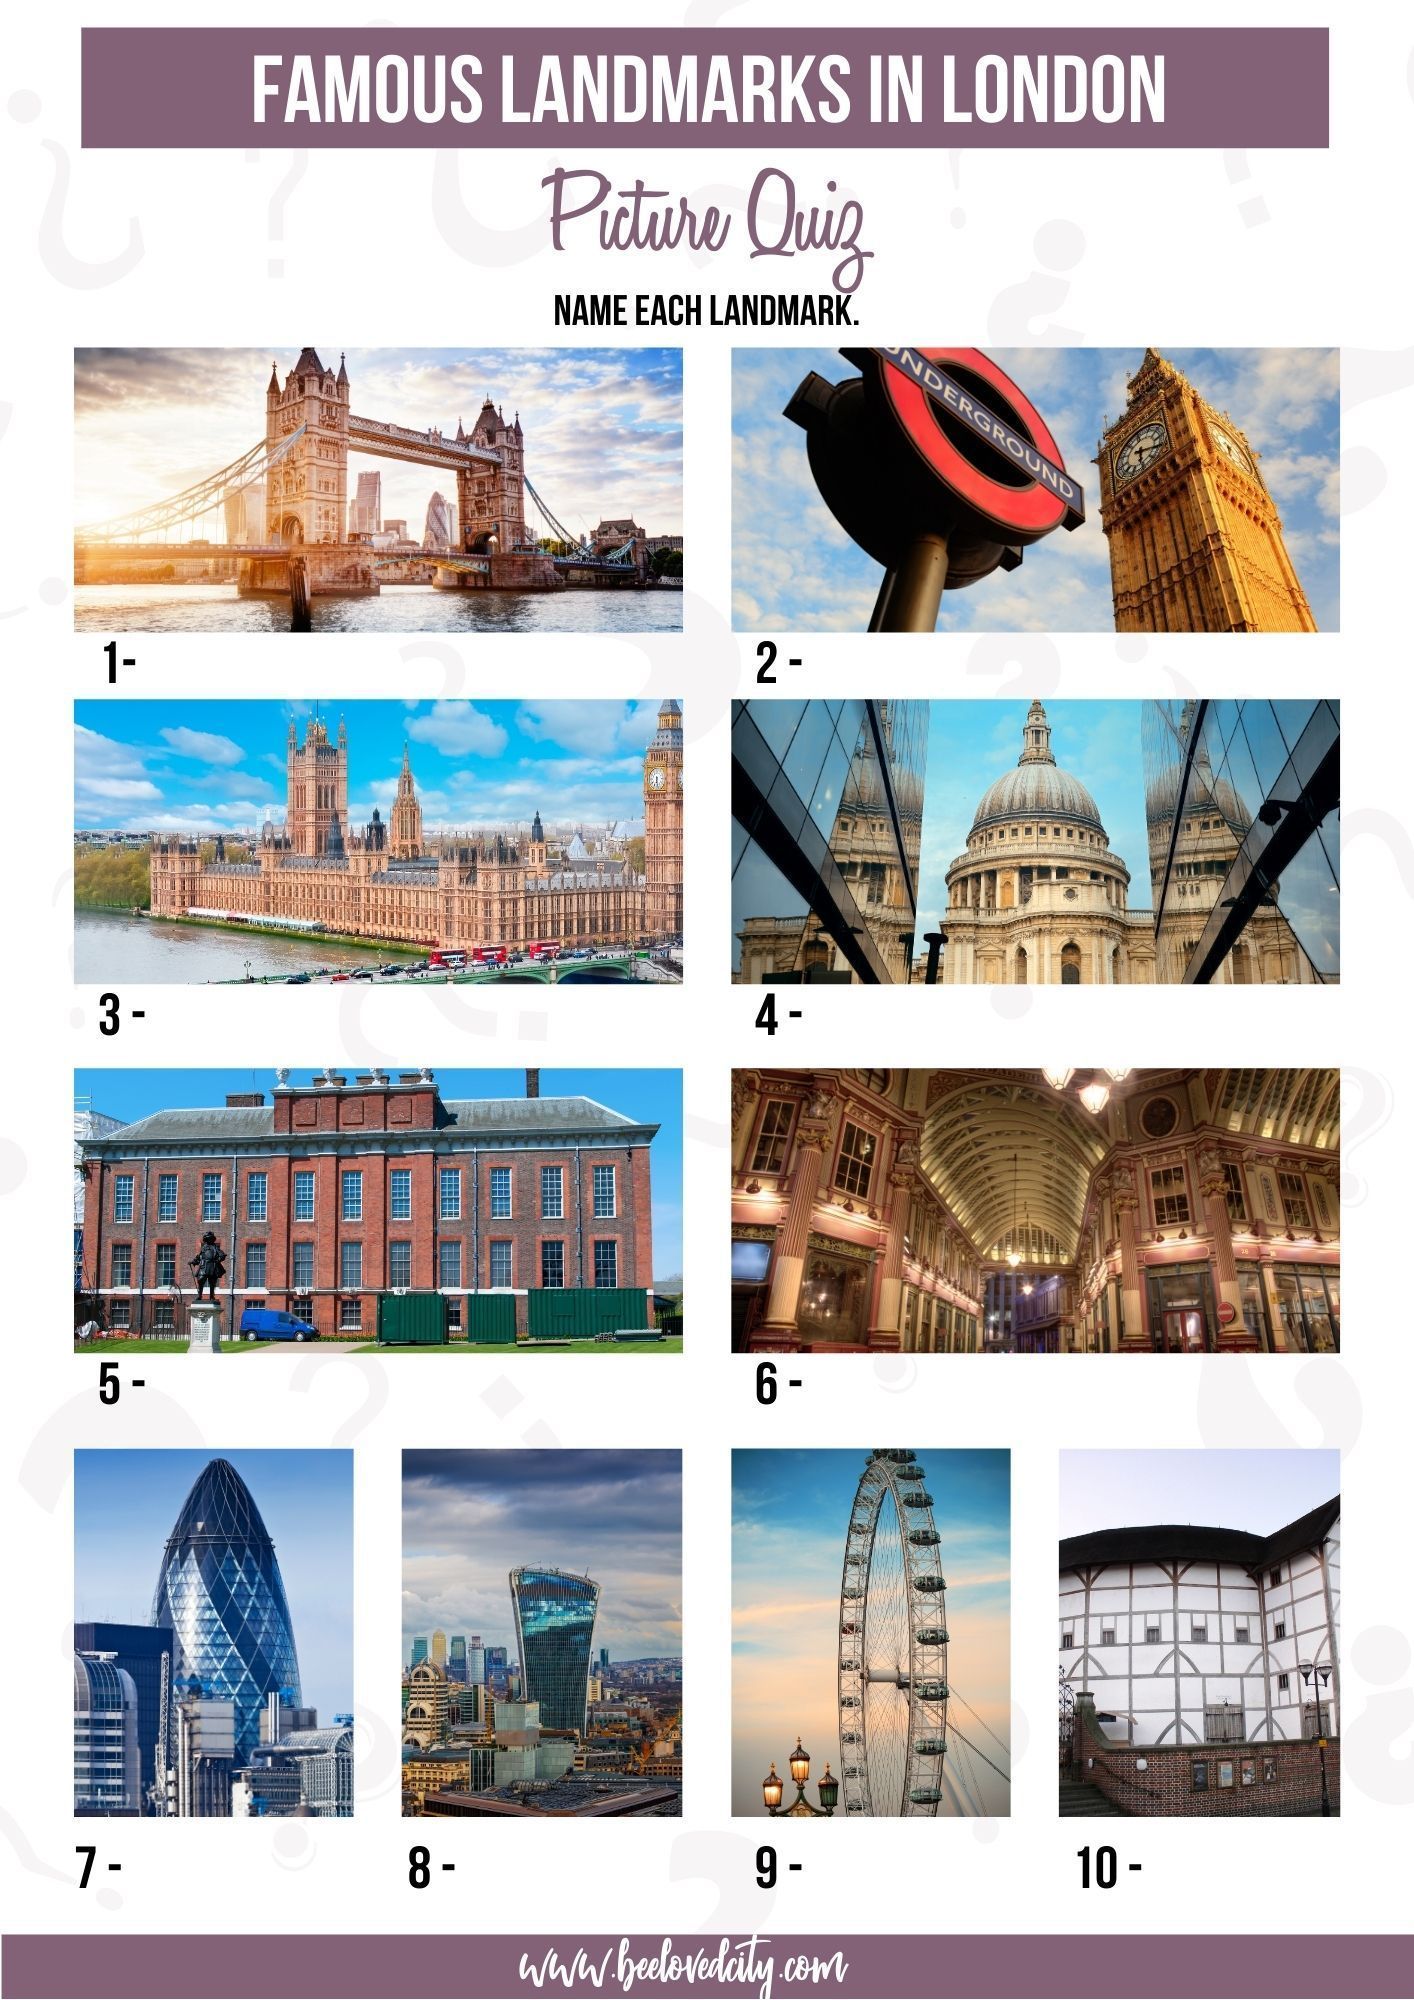 Which famous museum is located in South Kensington, London?